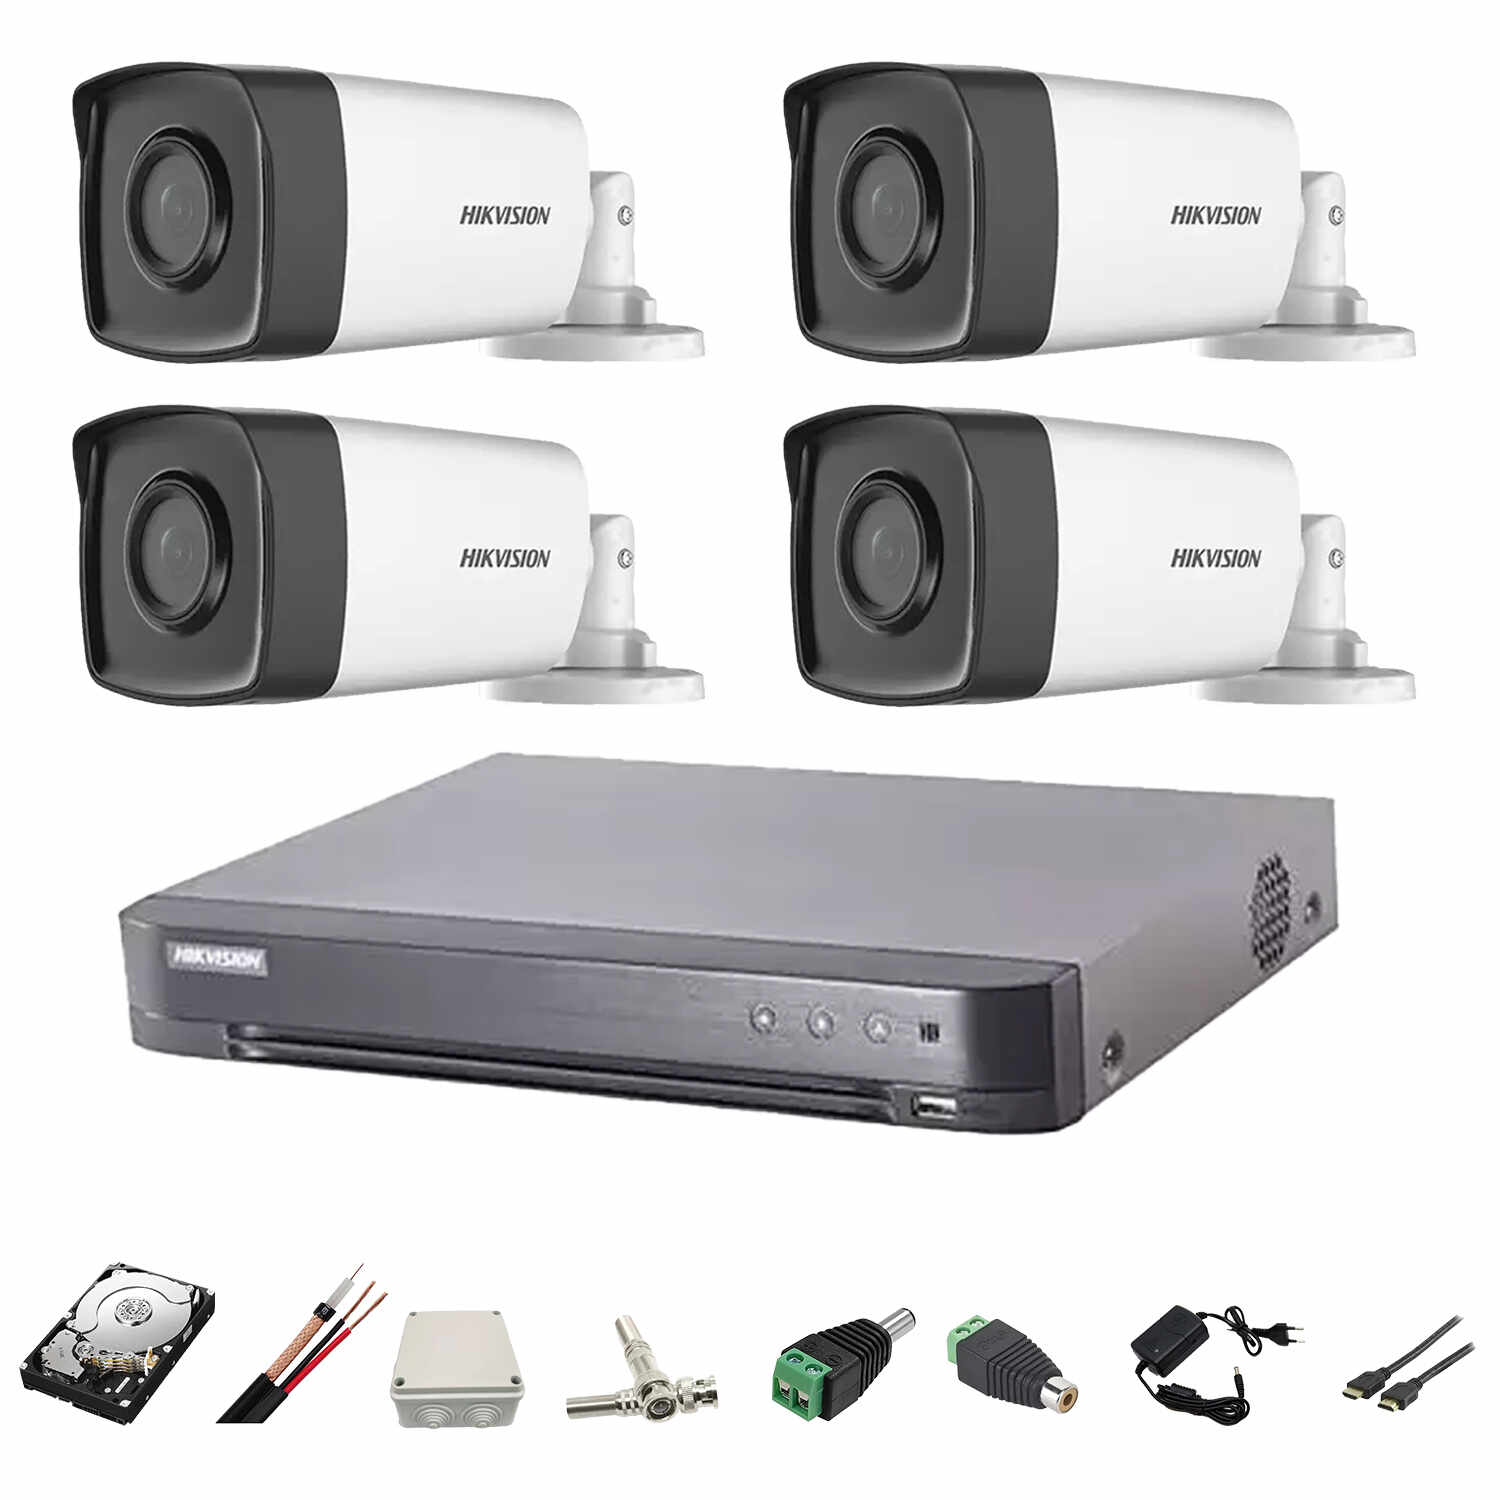 Kit complet 4 camere supraveghere full hd 80m IR Hikvision, cablu 100m si HDD 2TB